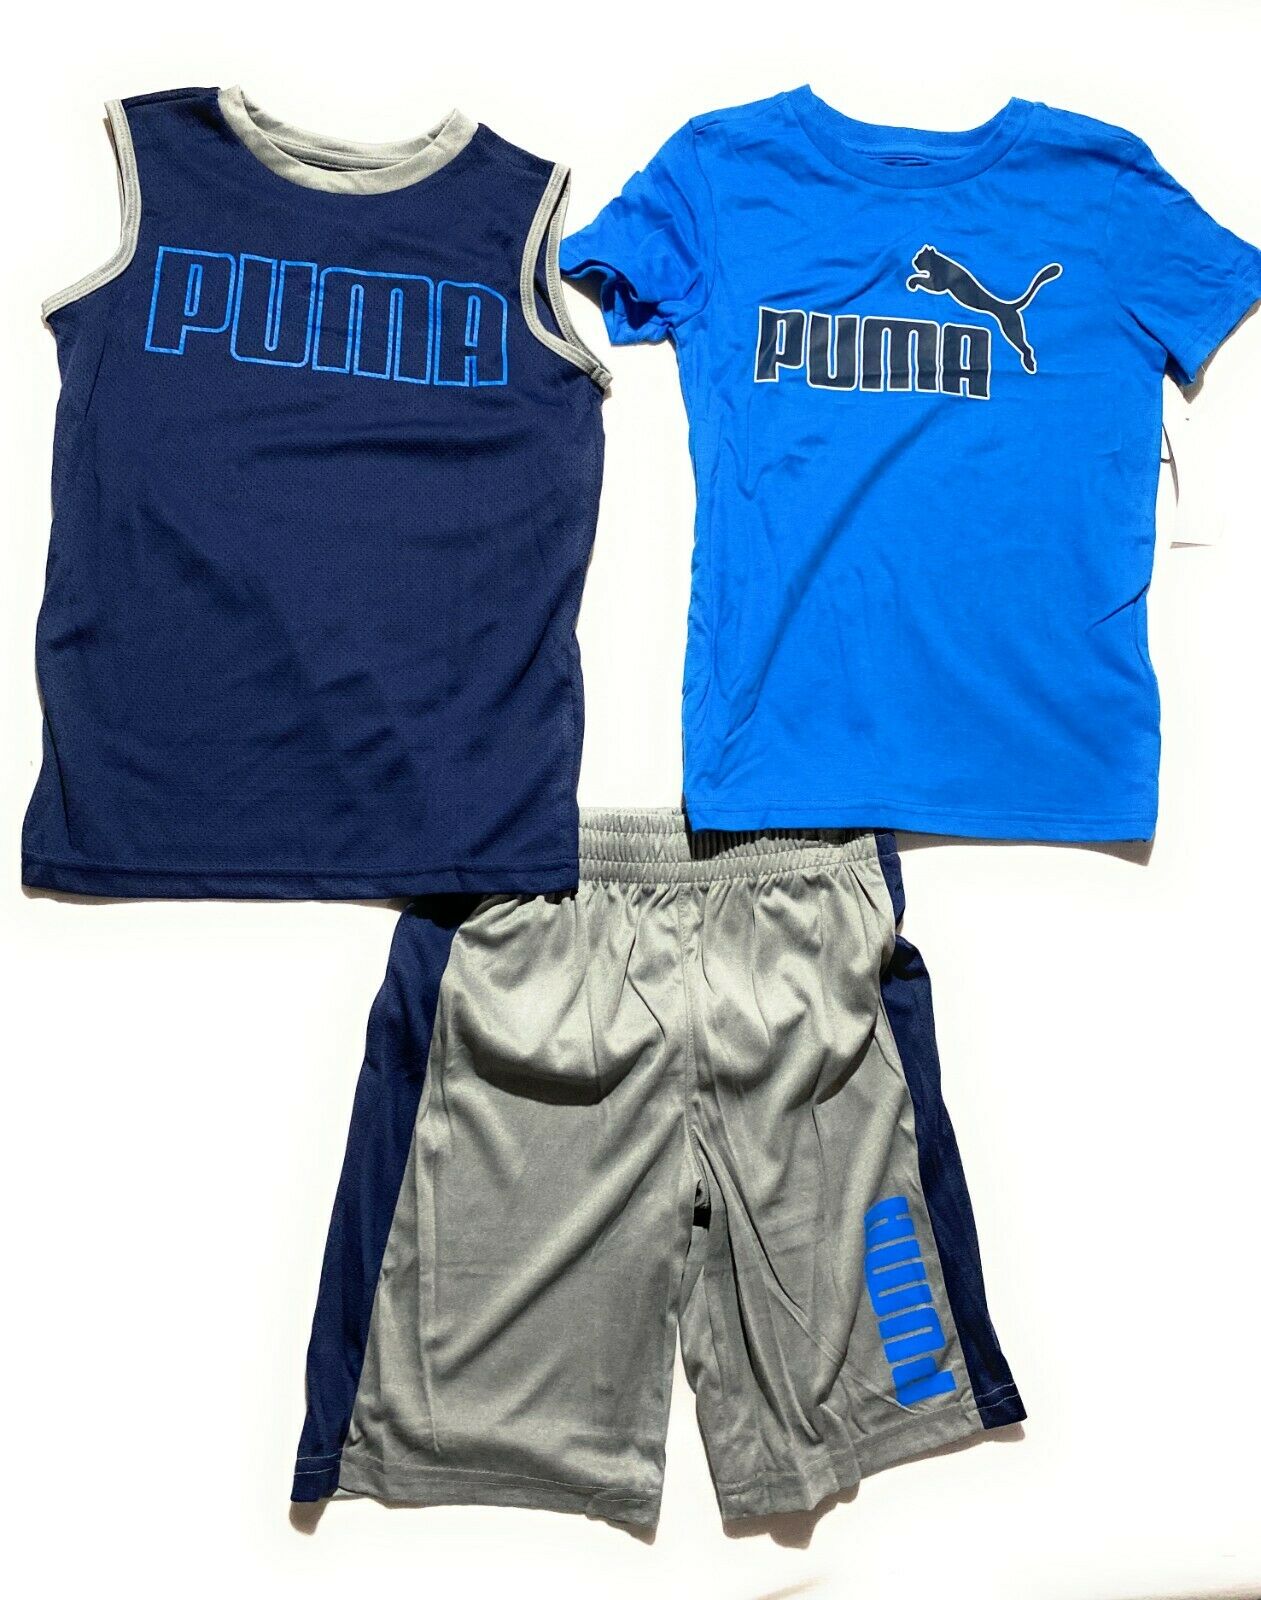 Puma Boys' 3 Pcs Set (short /t-shirt / Muscle Shirt) Outfit Ages 4- 17 Years